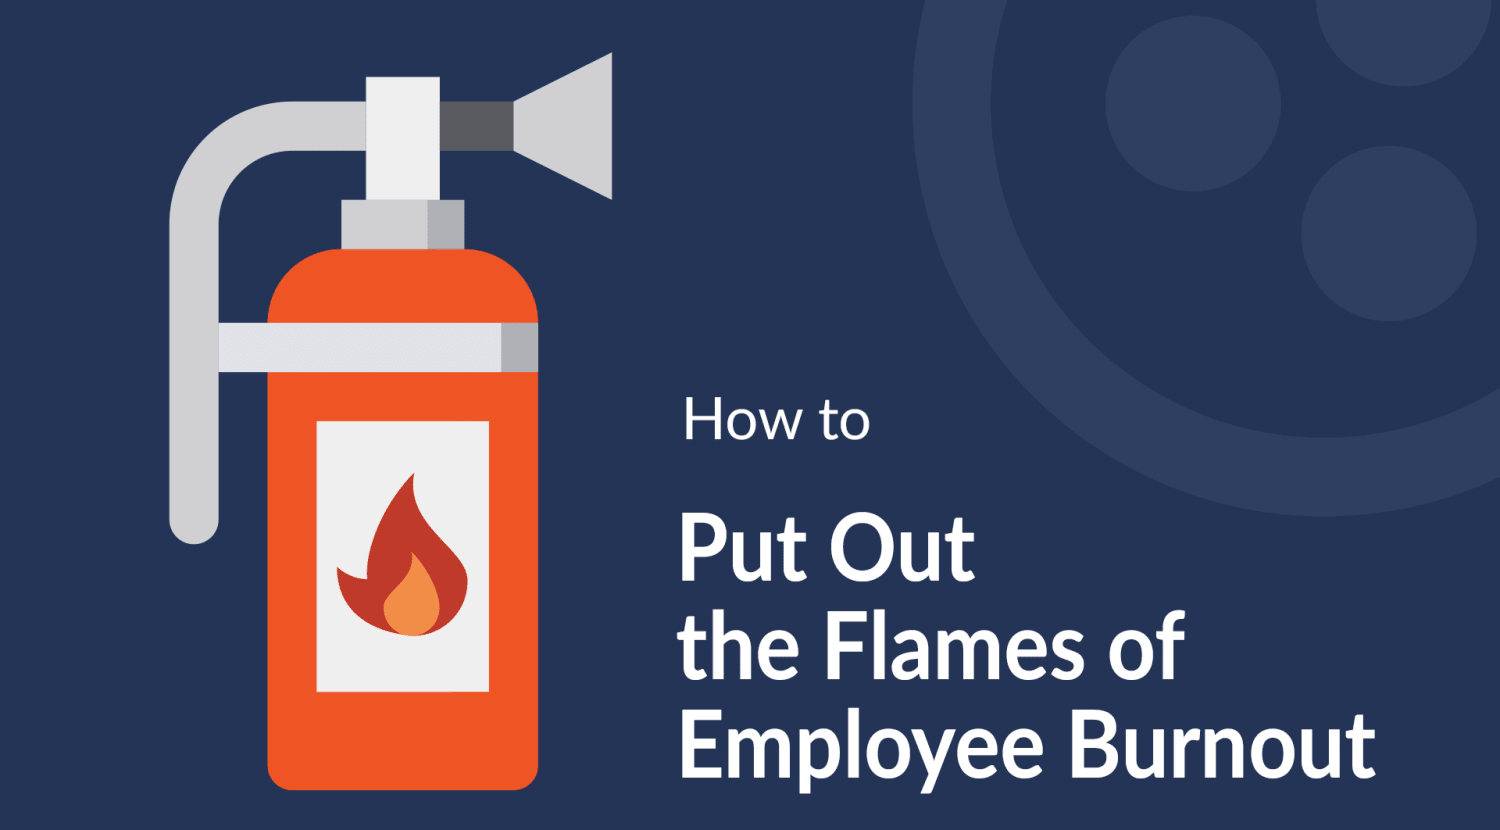 How to Put Out the Flames of Employee Burnout